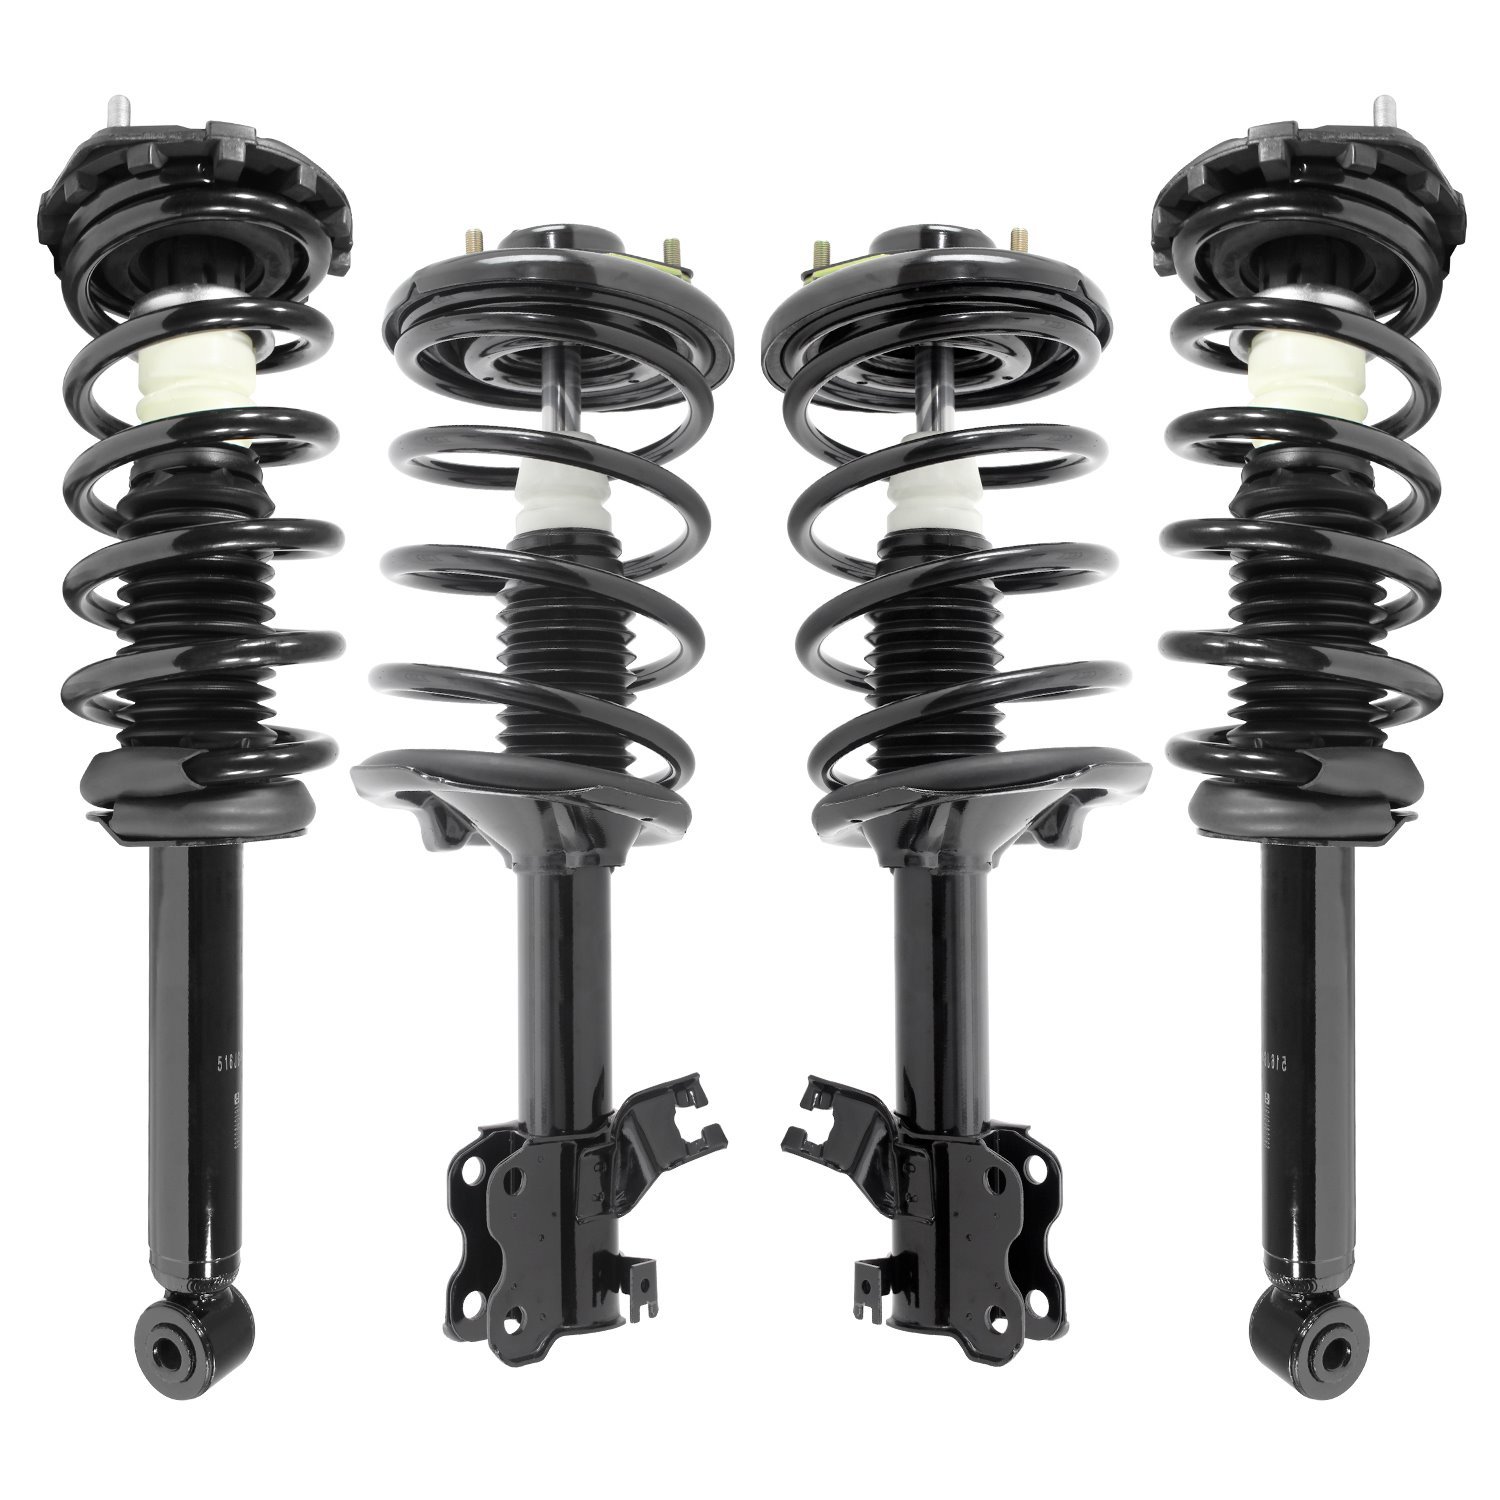 4-11941-15430-001 Front & Rear Suspension Strut & Coil Spring Assembly Kit Fits Select Nissan Maxima, Infiniti I30